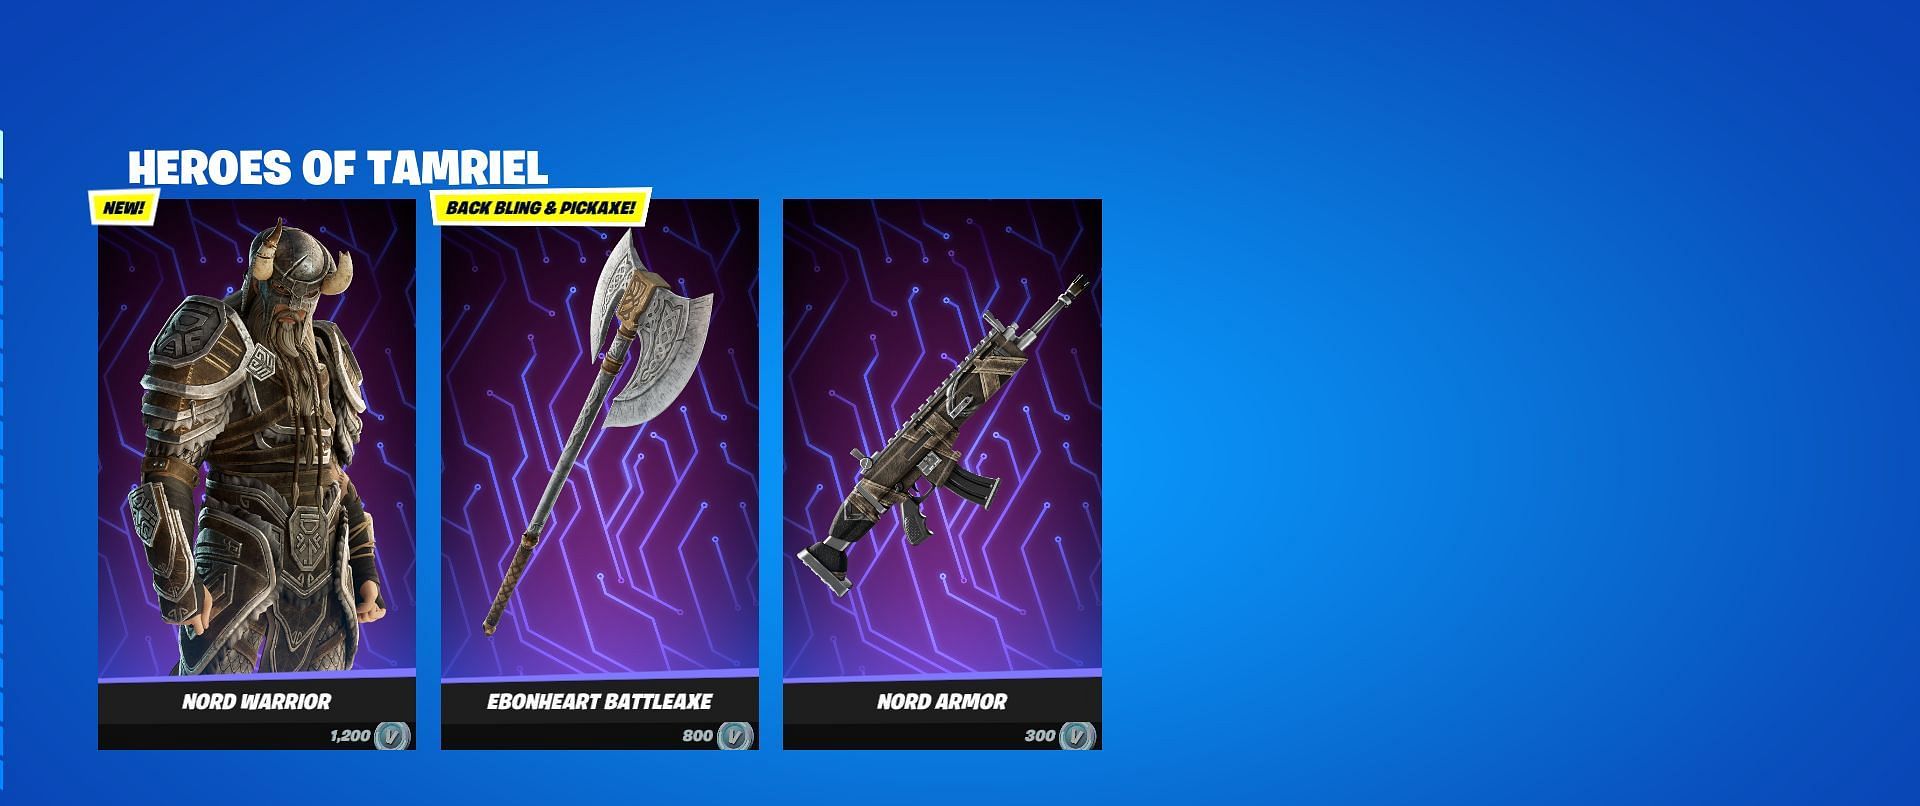 Heroes of Tamriel is available in the Item Shop (Image via Epic Games/Fortnite)